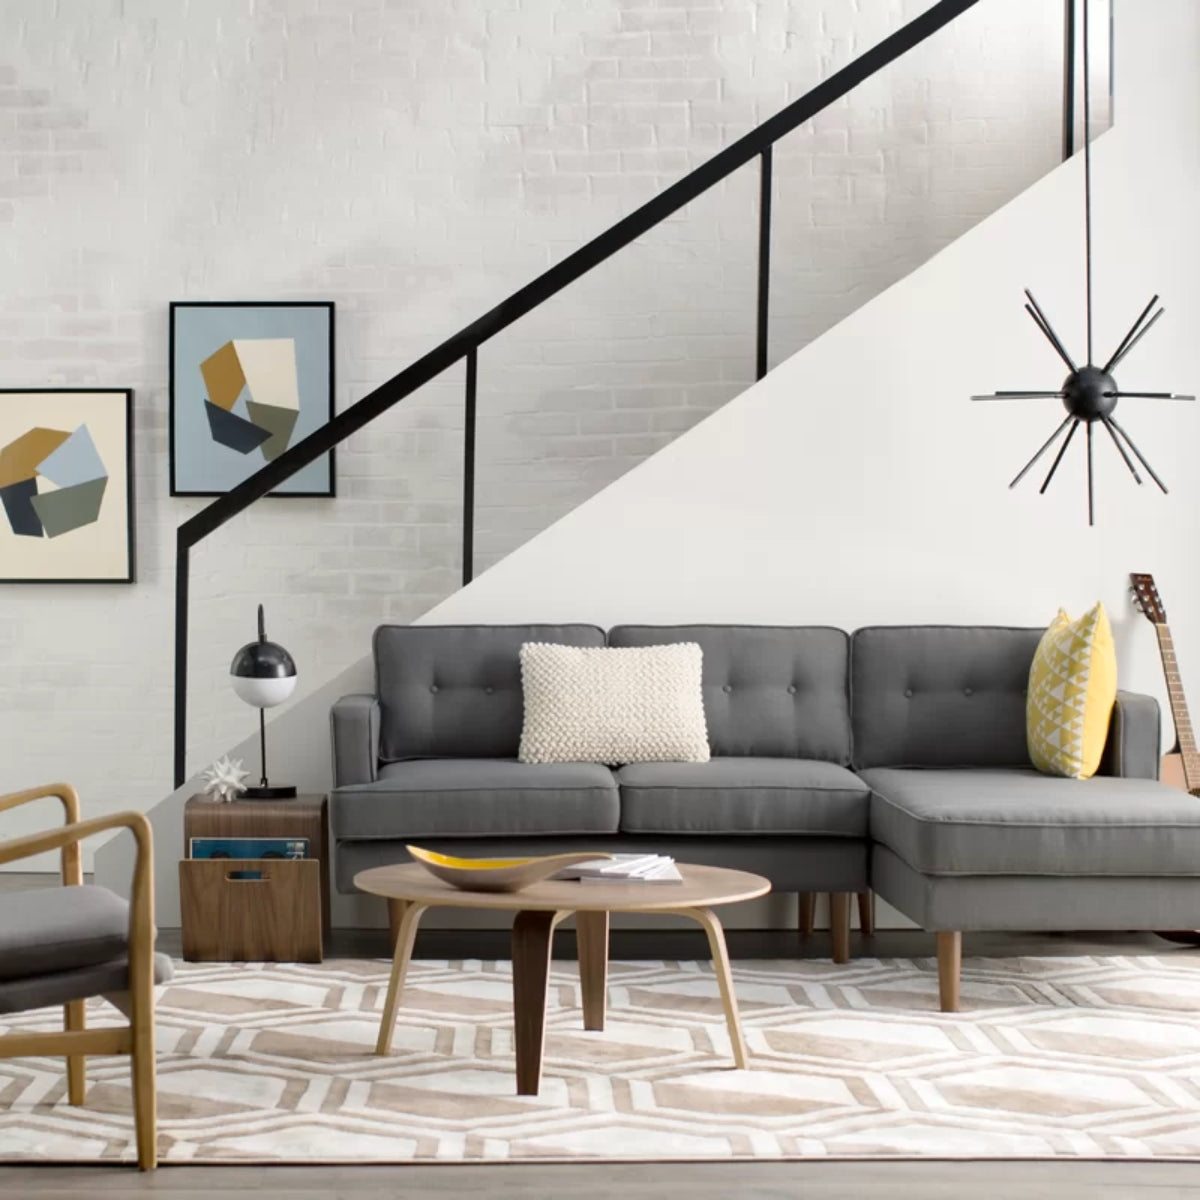 A modern living room with a gray sofa, chair, rug, and a replica Eames molded plywood coffee table.